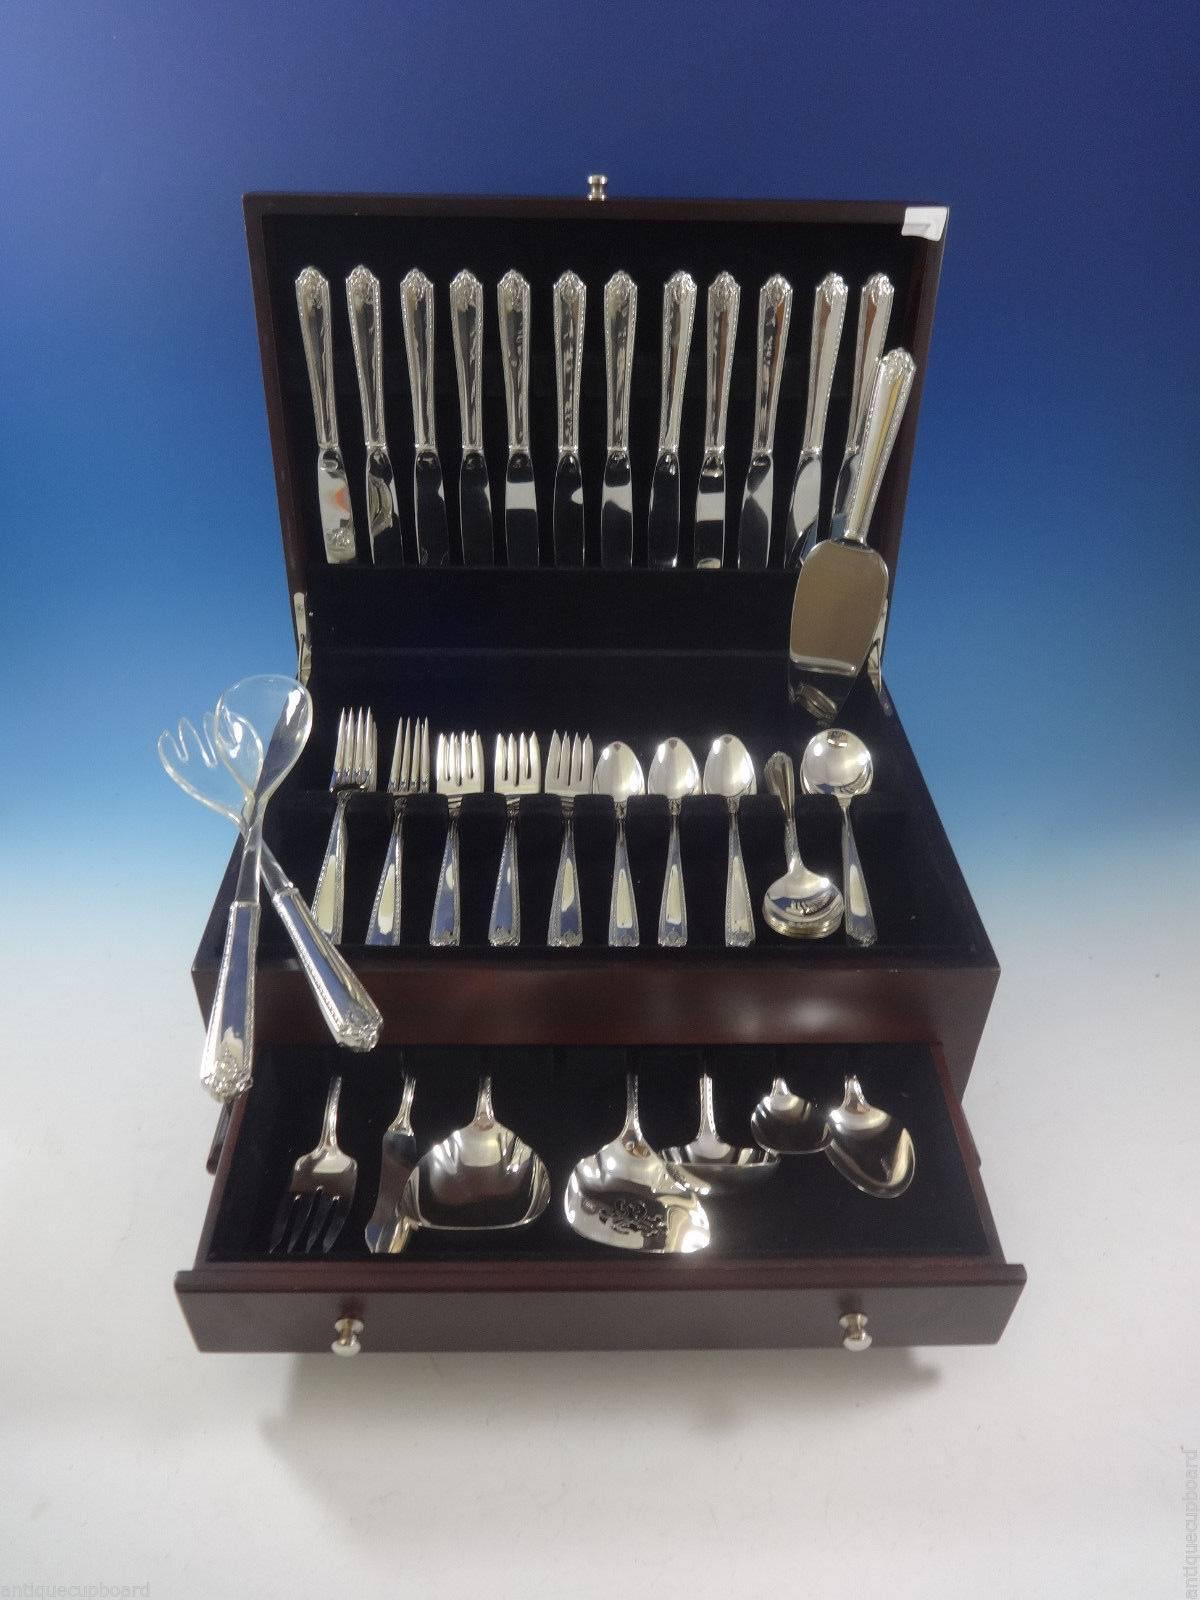 Lady Hilton by Westmorland sterling silver flatware set - 70 pieces. This set includes:

12 knives, 9